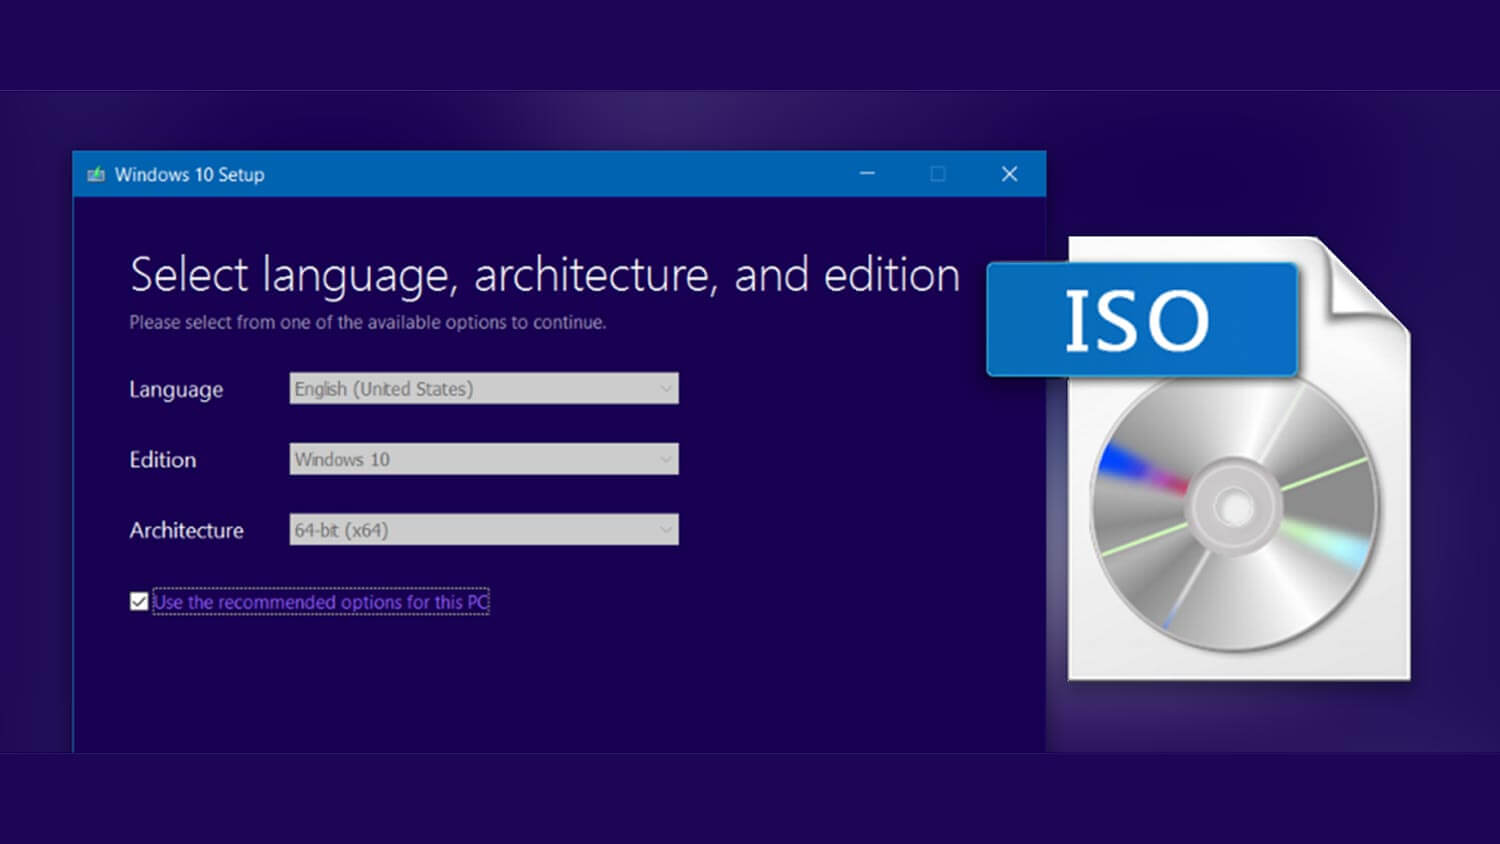 windows 11 iso file download